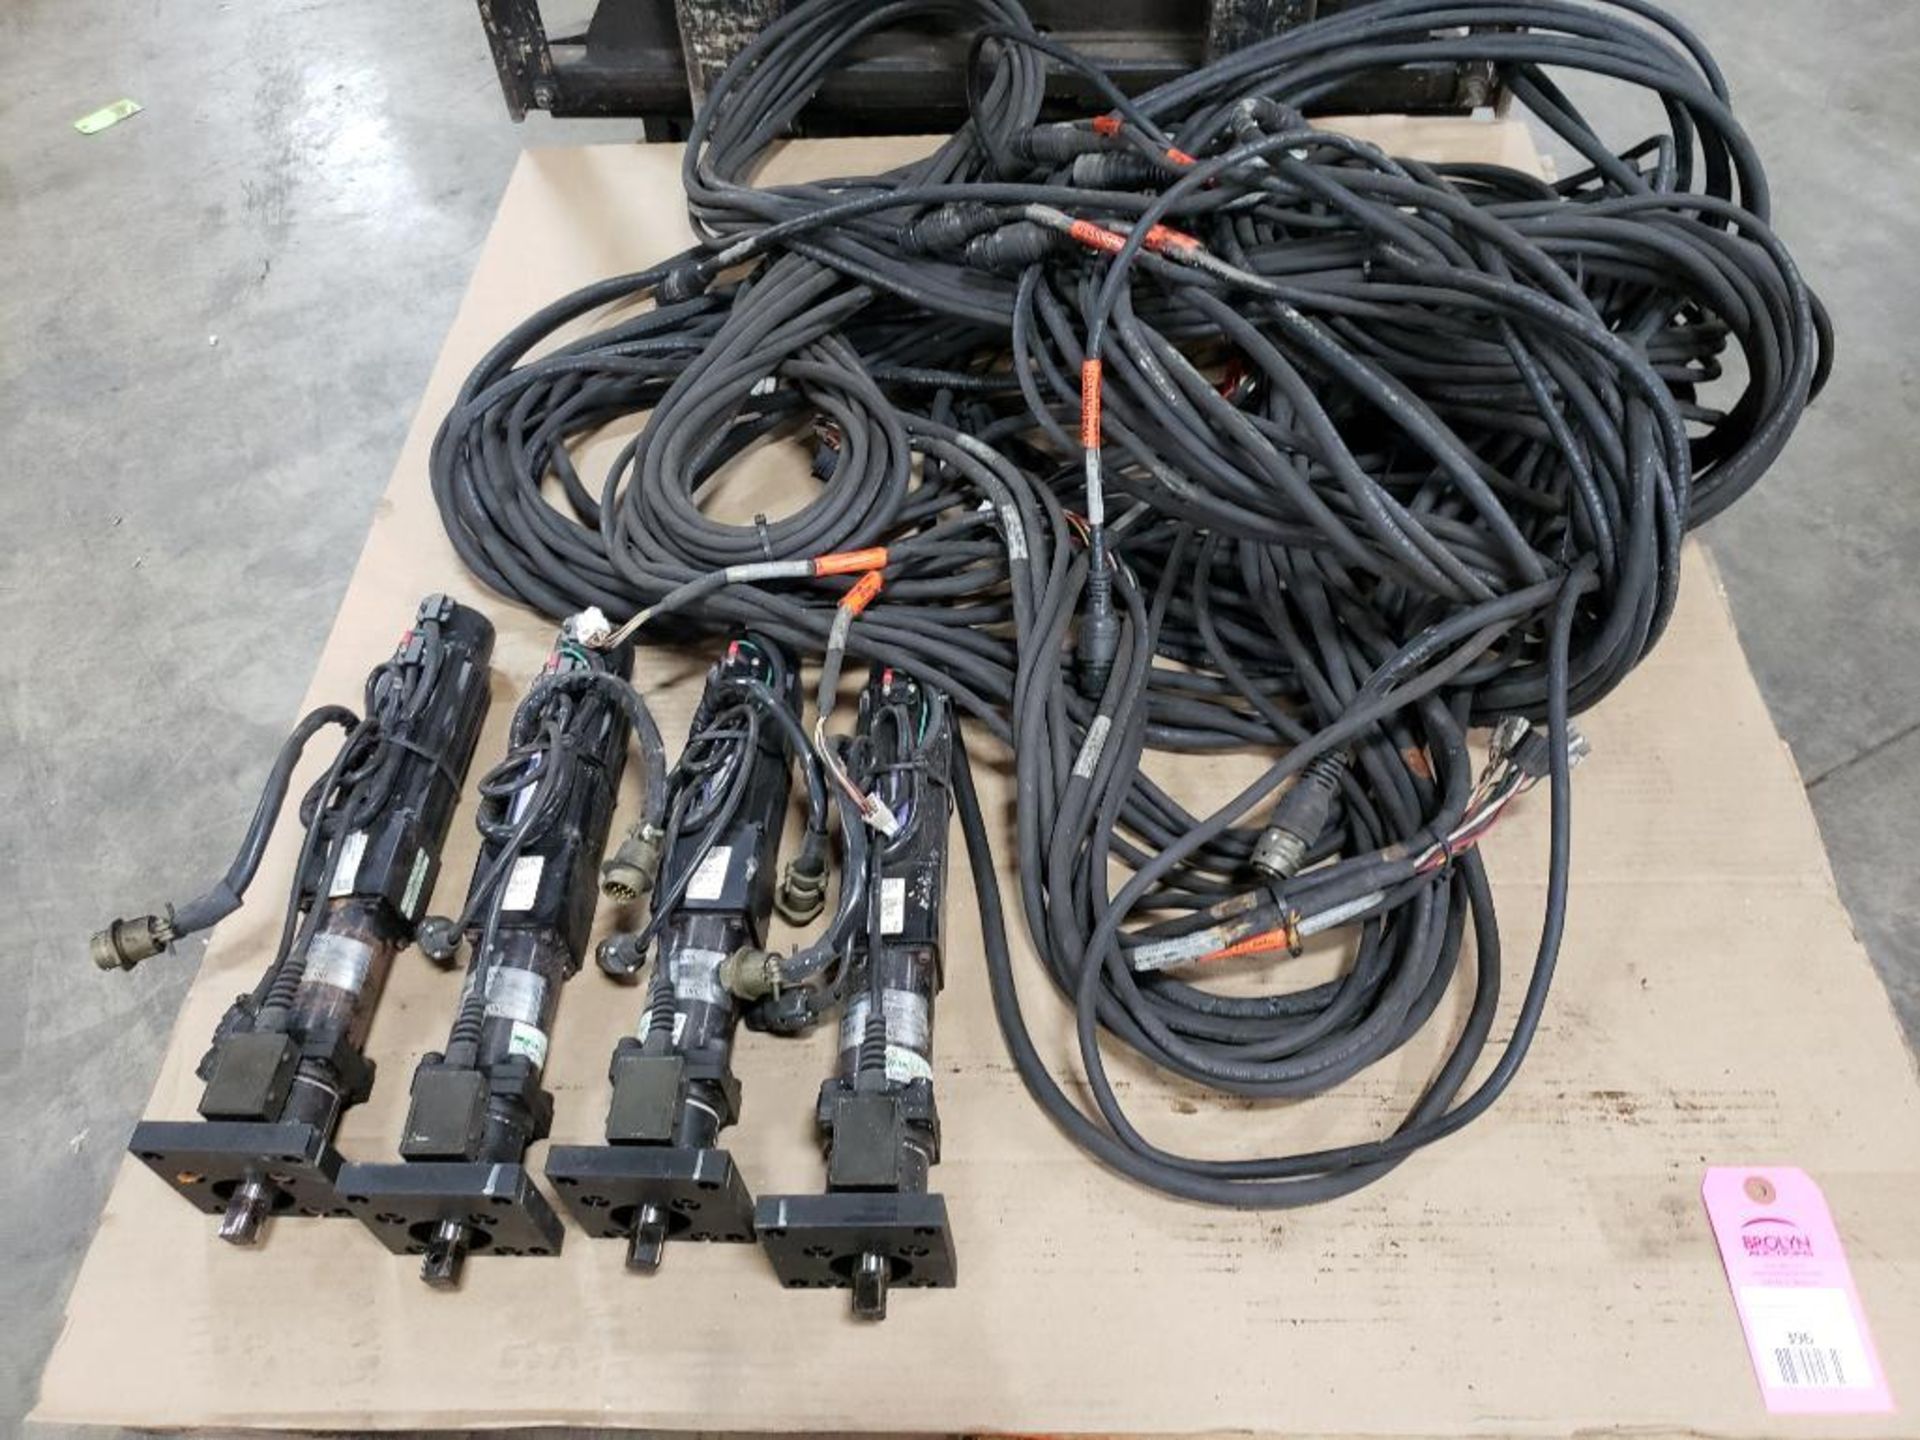 Qty 4 - FEC motorized nut runners NFT-202RM3-S and connection cords. 0.64Nm-Torque.